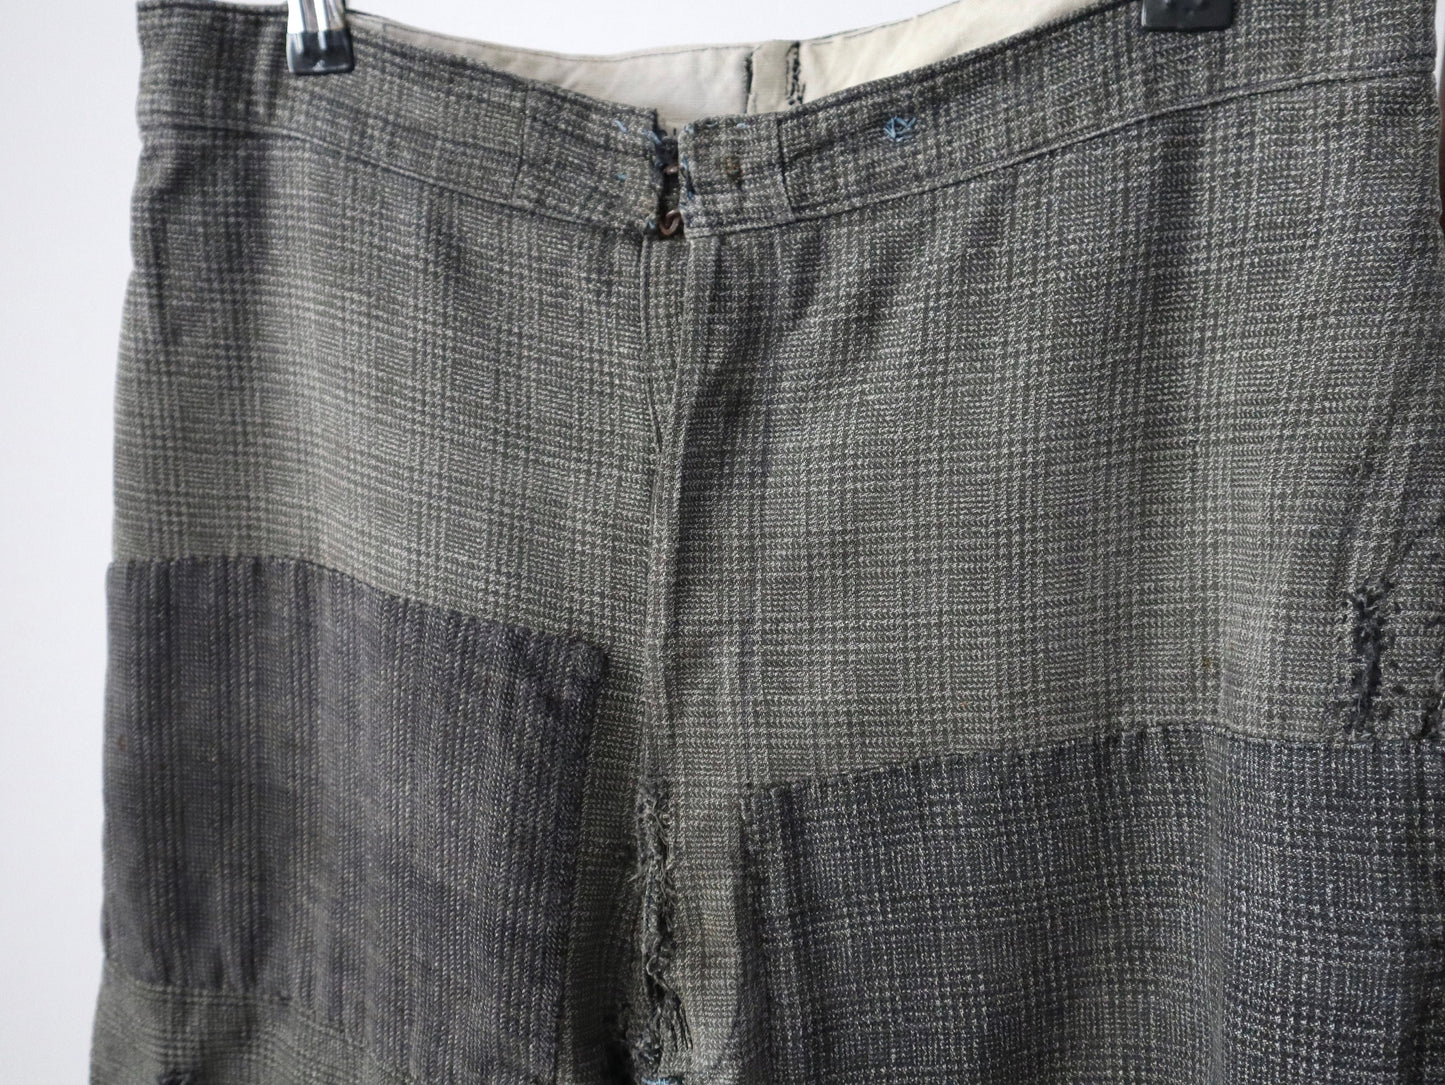 1920s French Workwear Chore Trousers Pants Grey Check Rare Early Patched